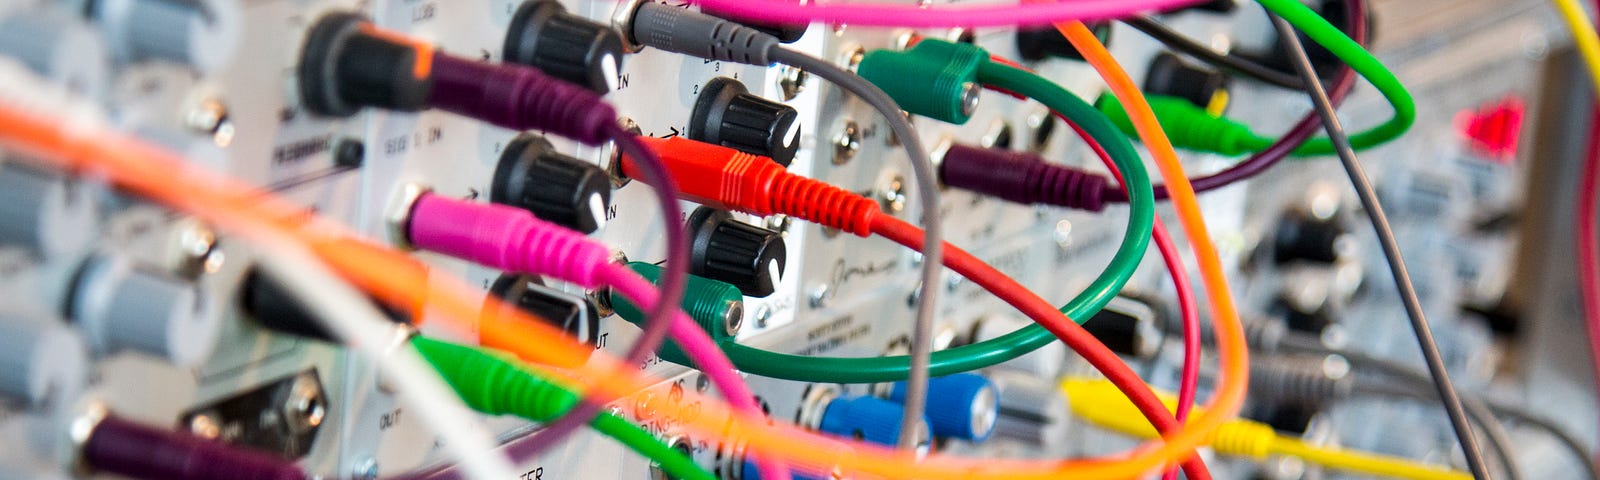 An image of a circuit board with multiple colored wires attaching and plugged in to different places.